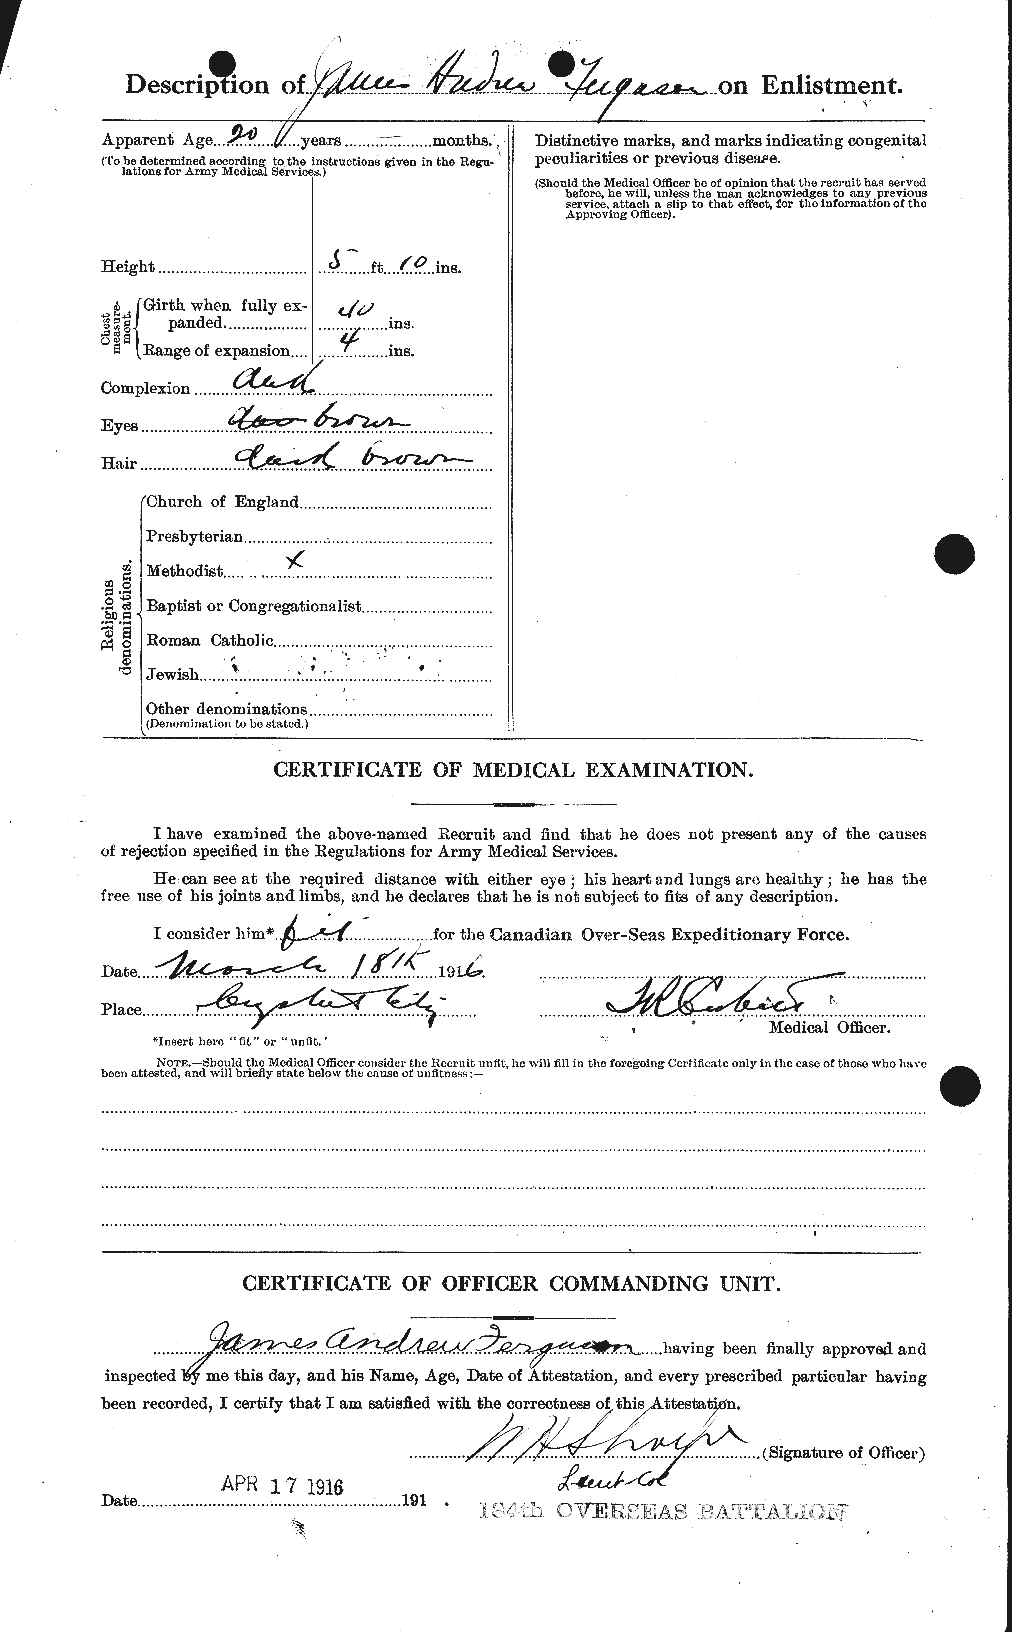 Personnel Records of the First World War - CEF 320253b